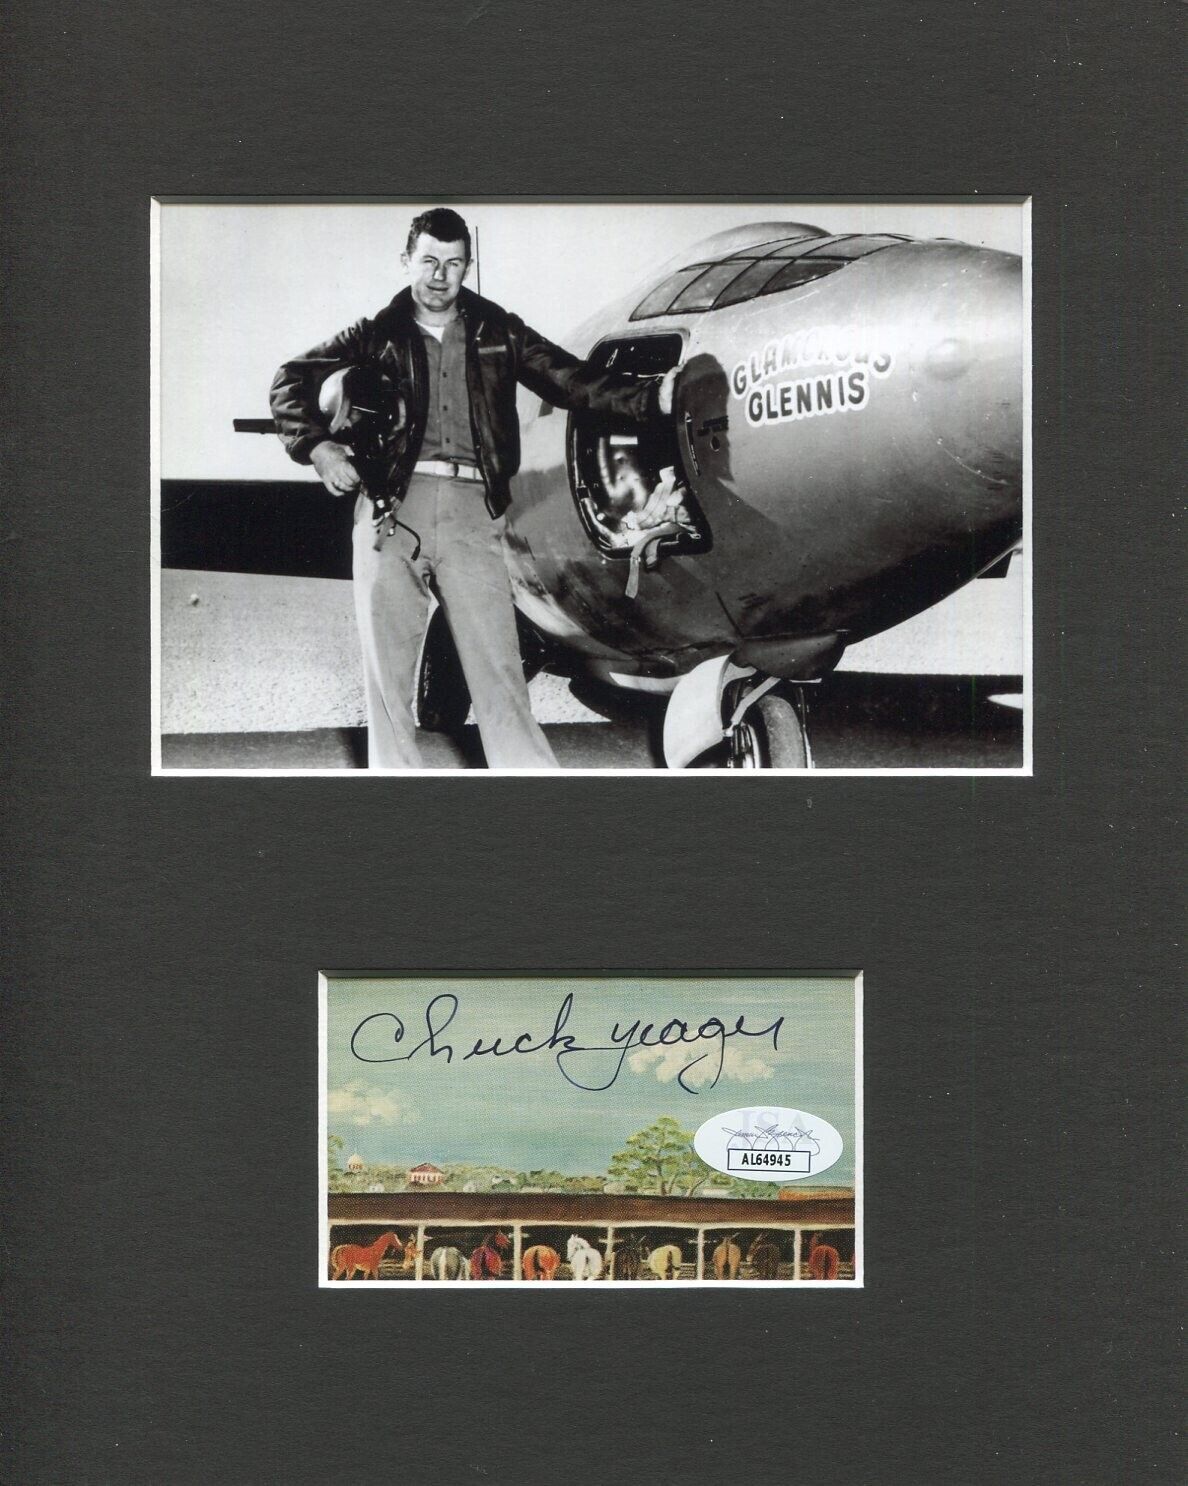 Chuck Yeager WWII War Ace Test Pilot Sound Signed Autograph Photo Display JSA